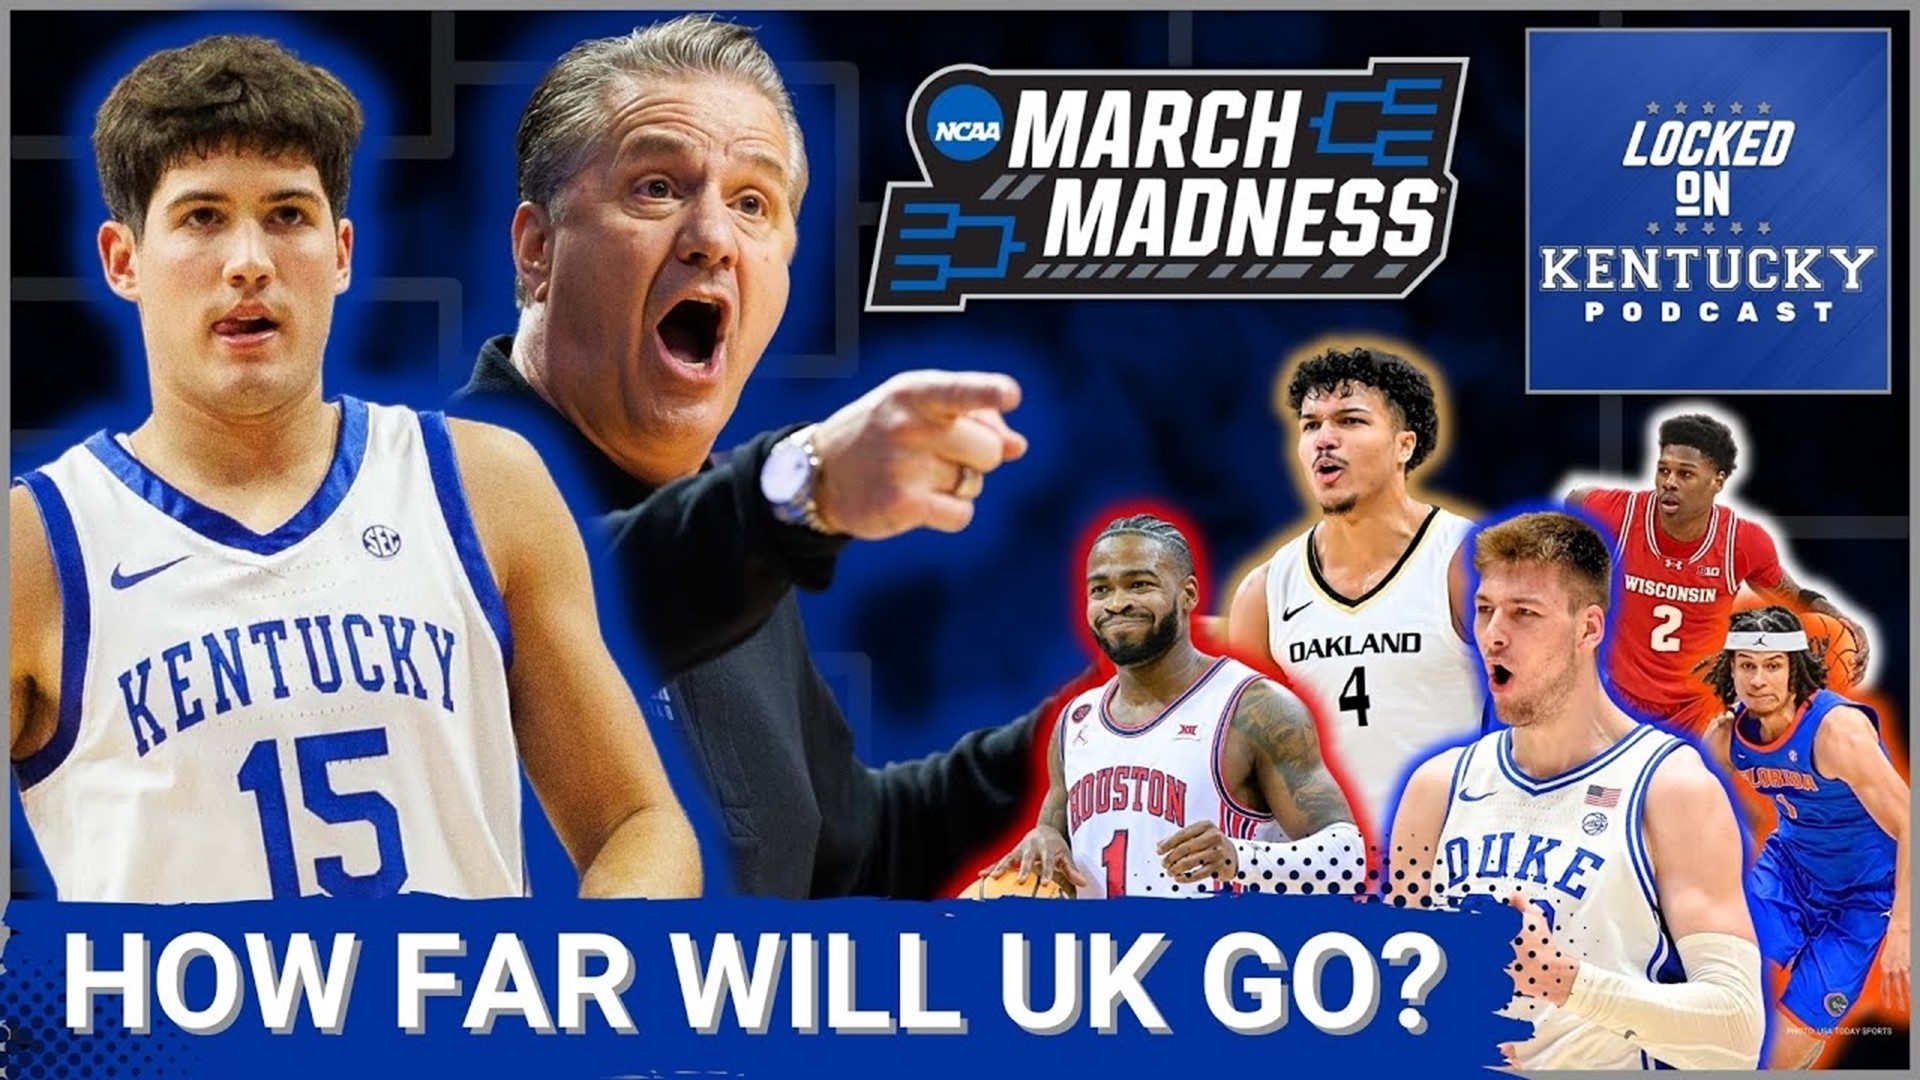 This is how far we believe Kentucky basketball is going in the NCAA tournament.